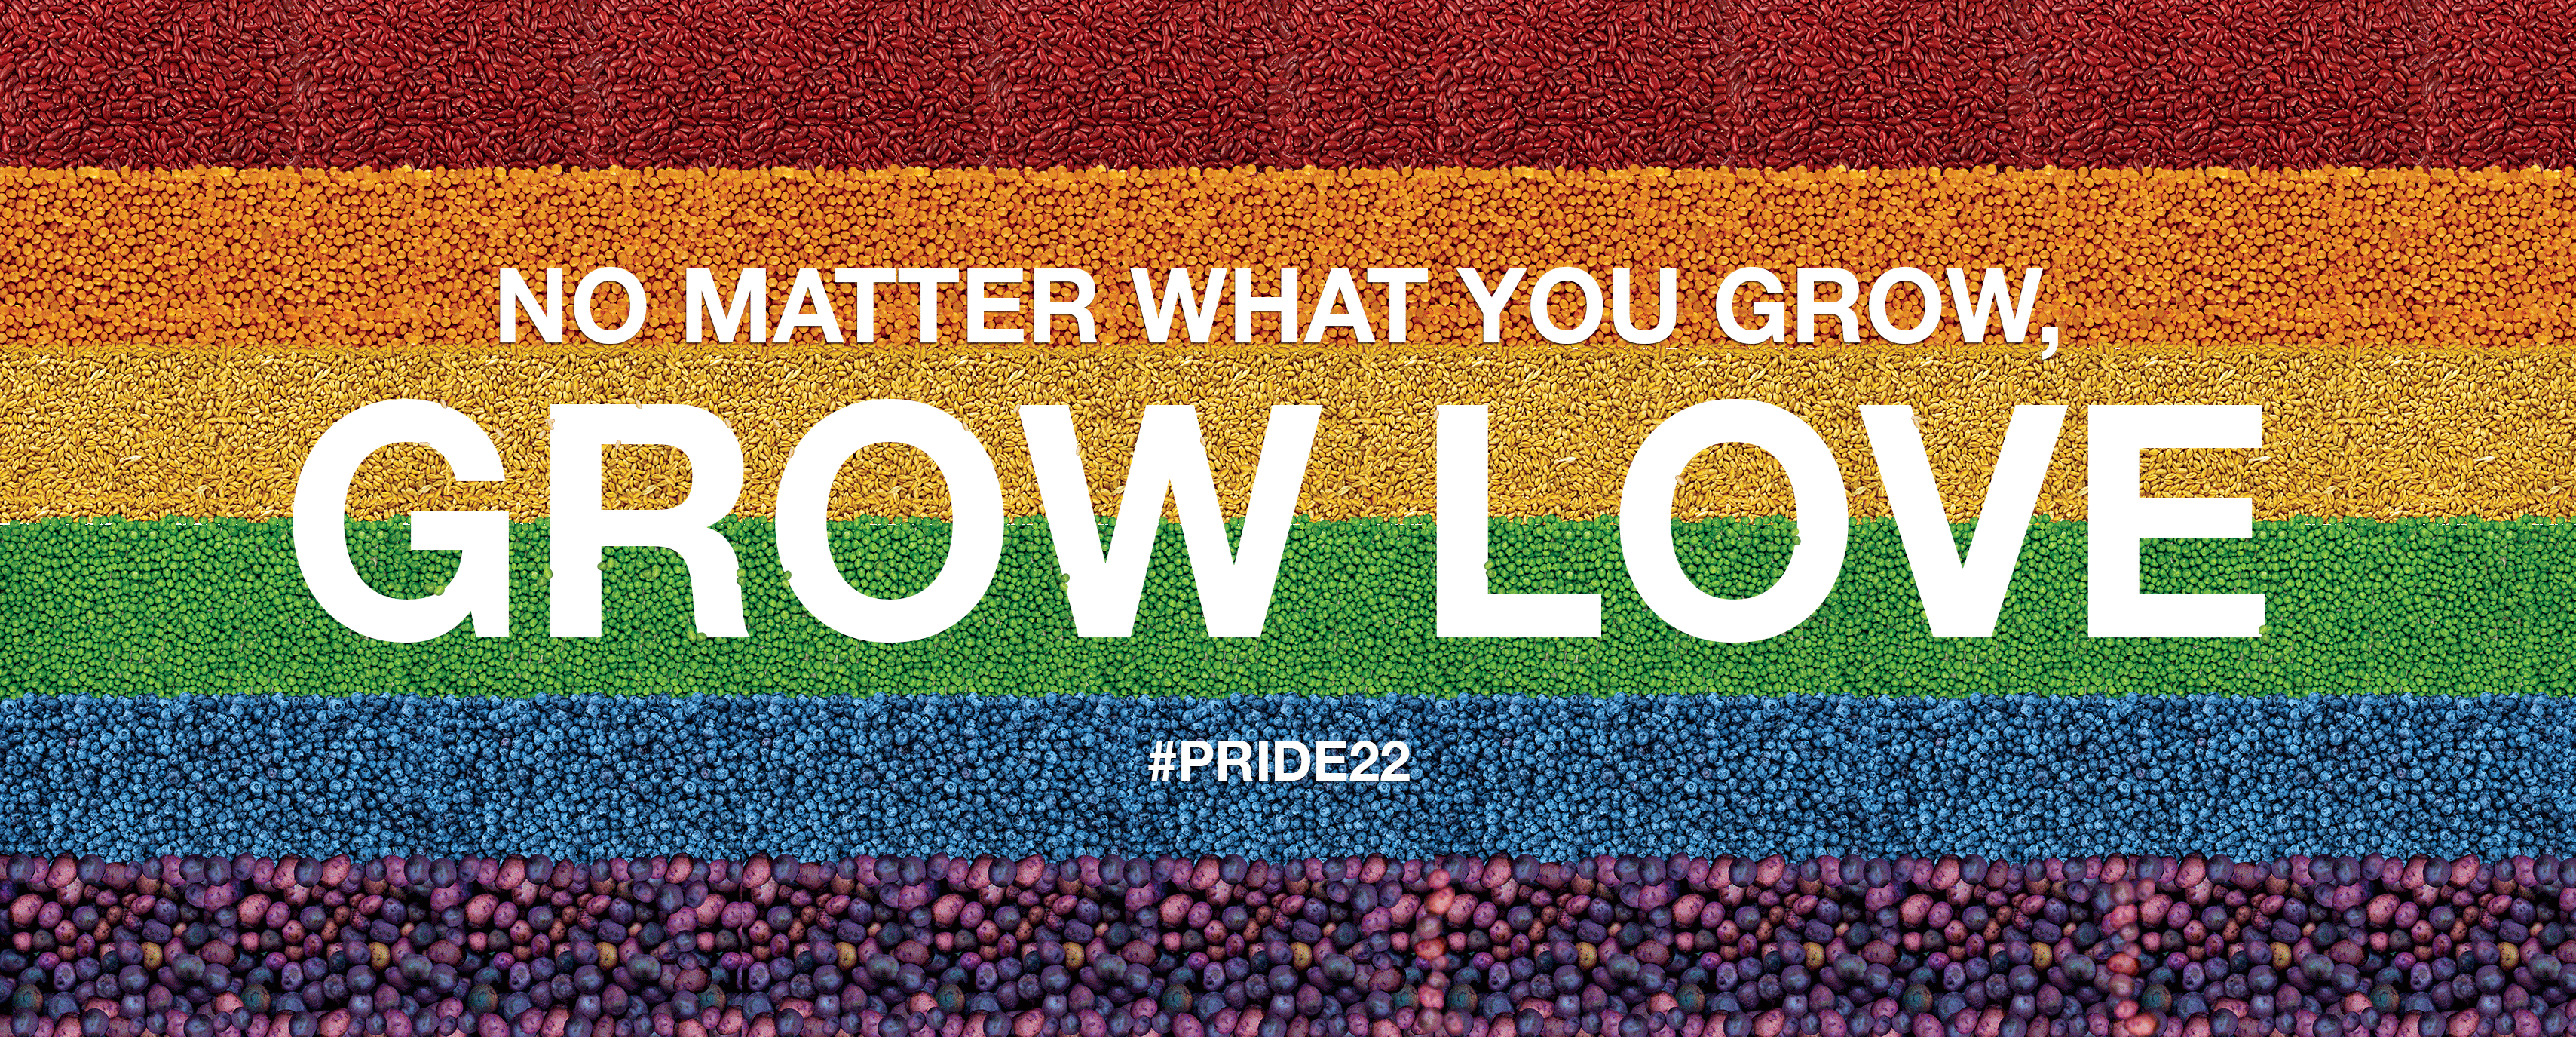 Pride 2022 - No matter what you grow, grow love